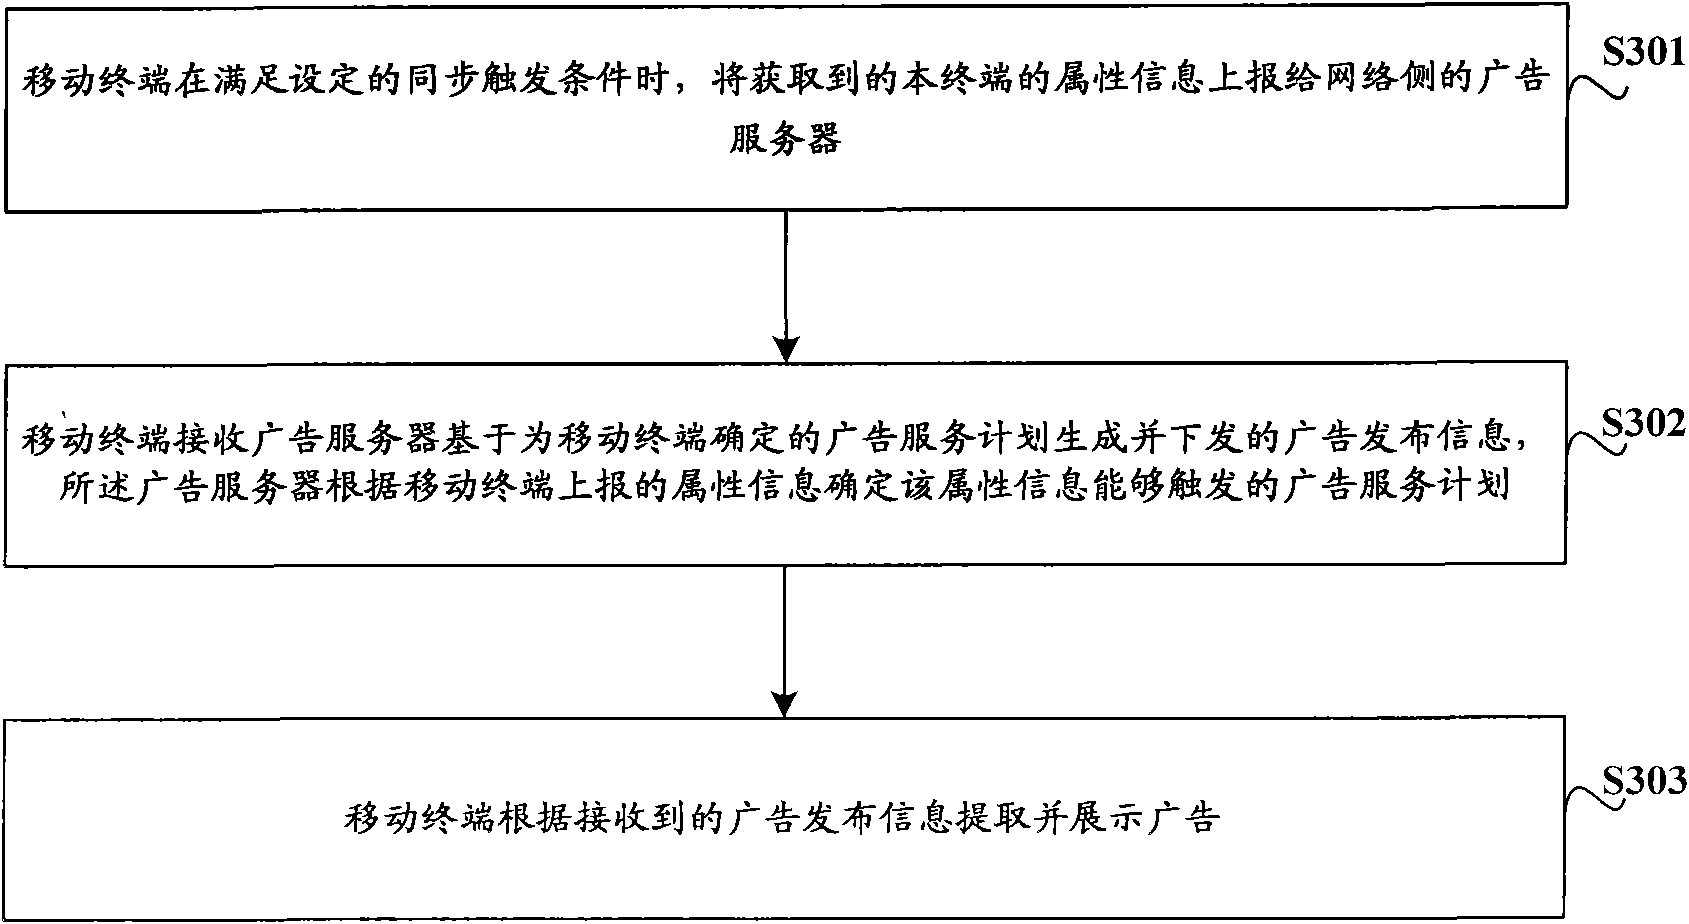 Mobile advertisement releasing system, method and related device